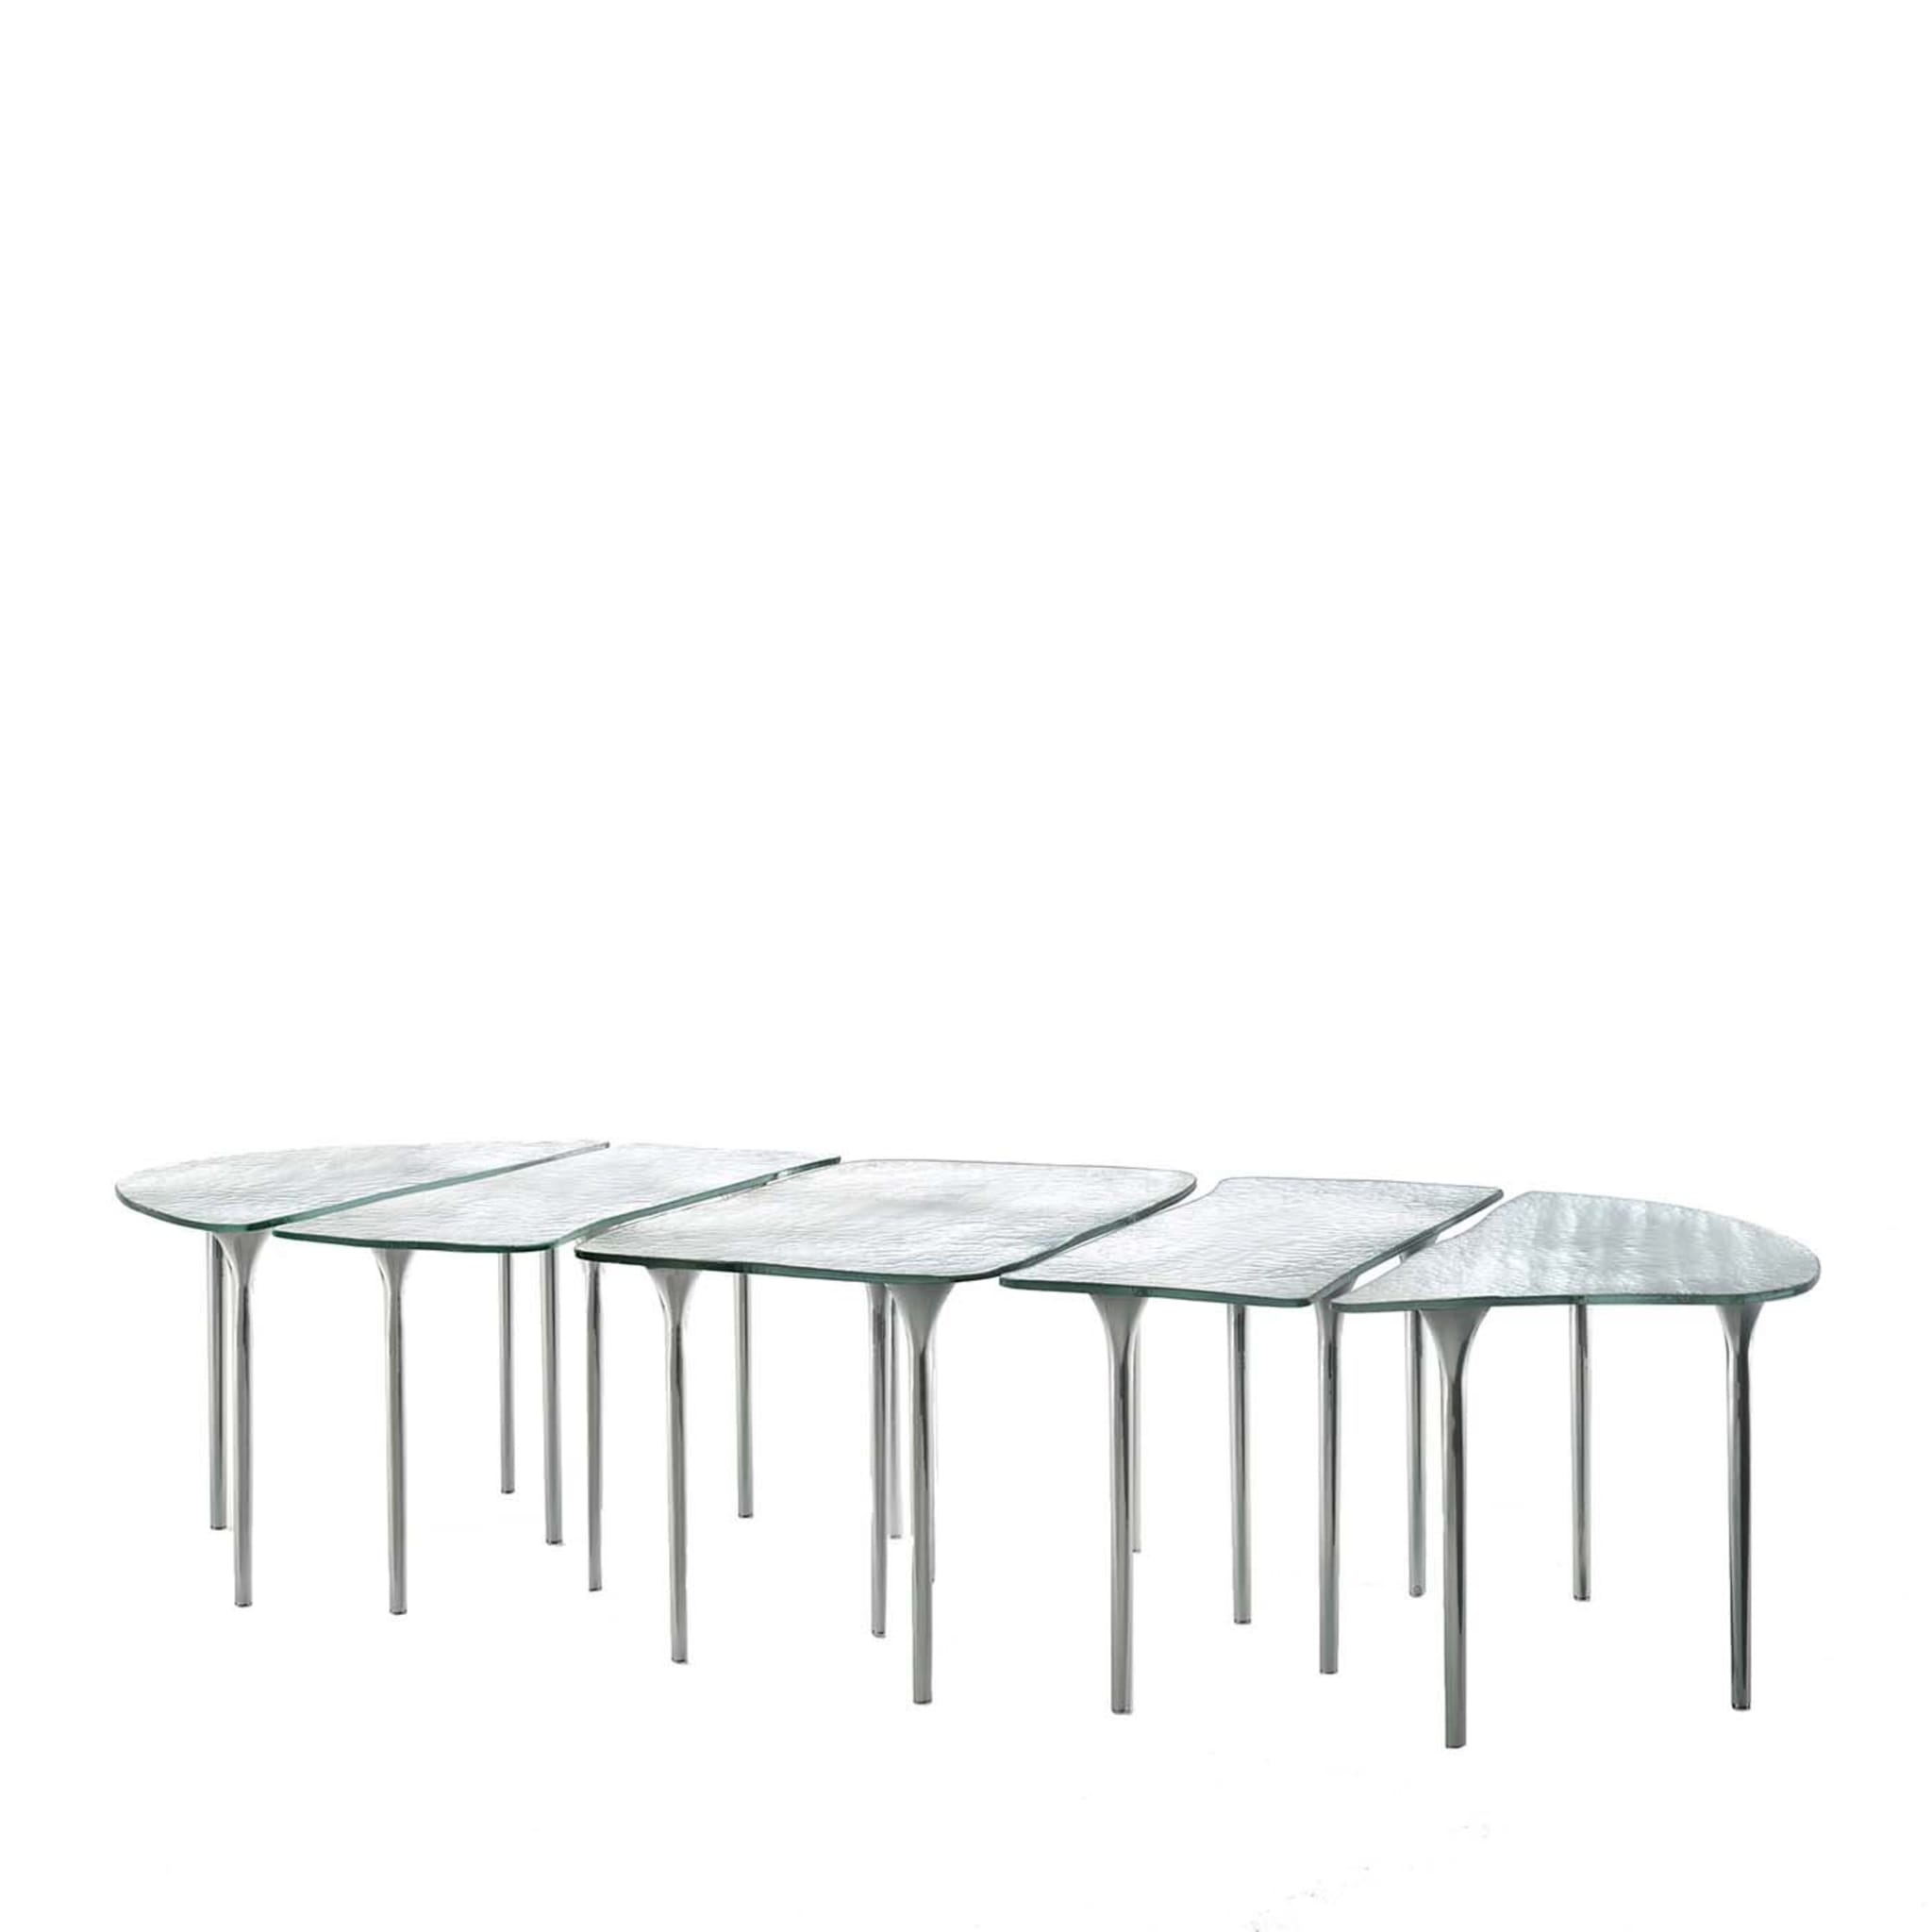 Tall Table by Massimiliano Locatelli-CLS Architetti - Main view